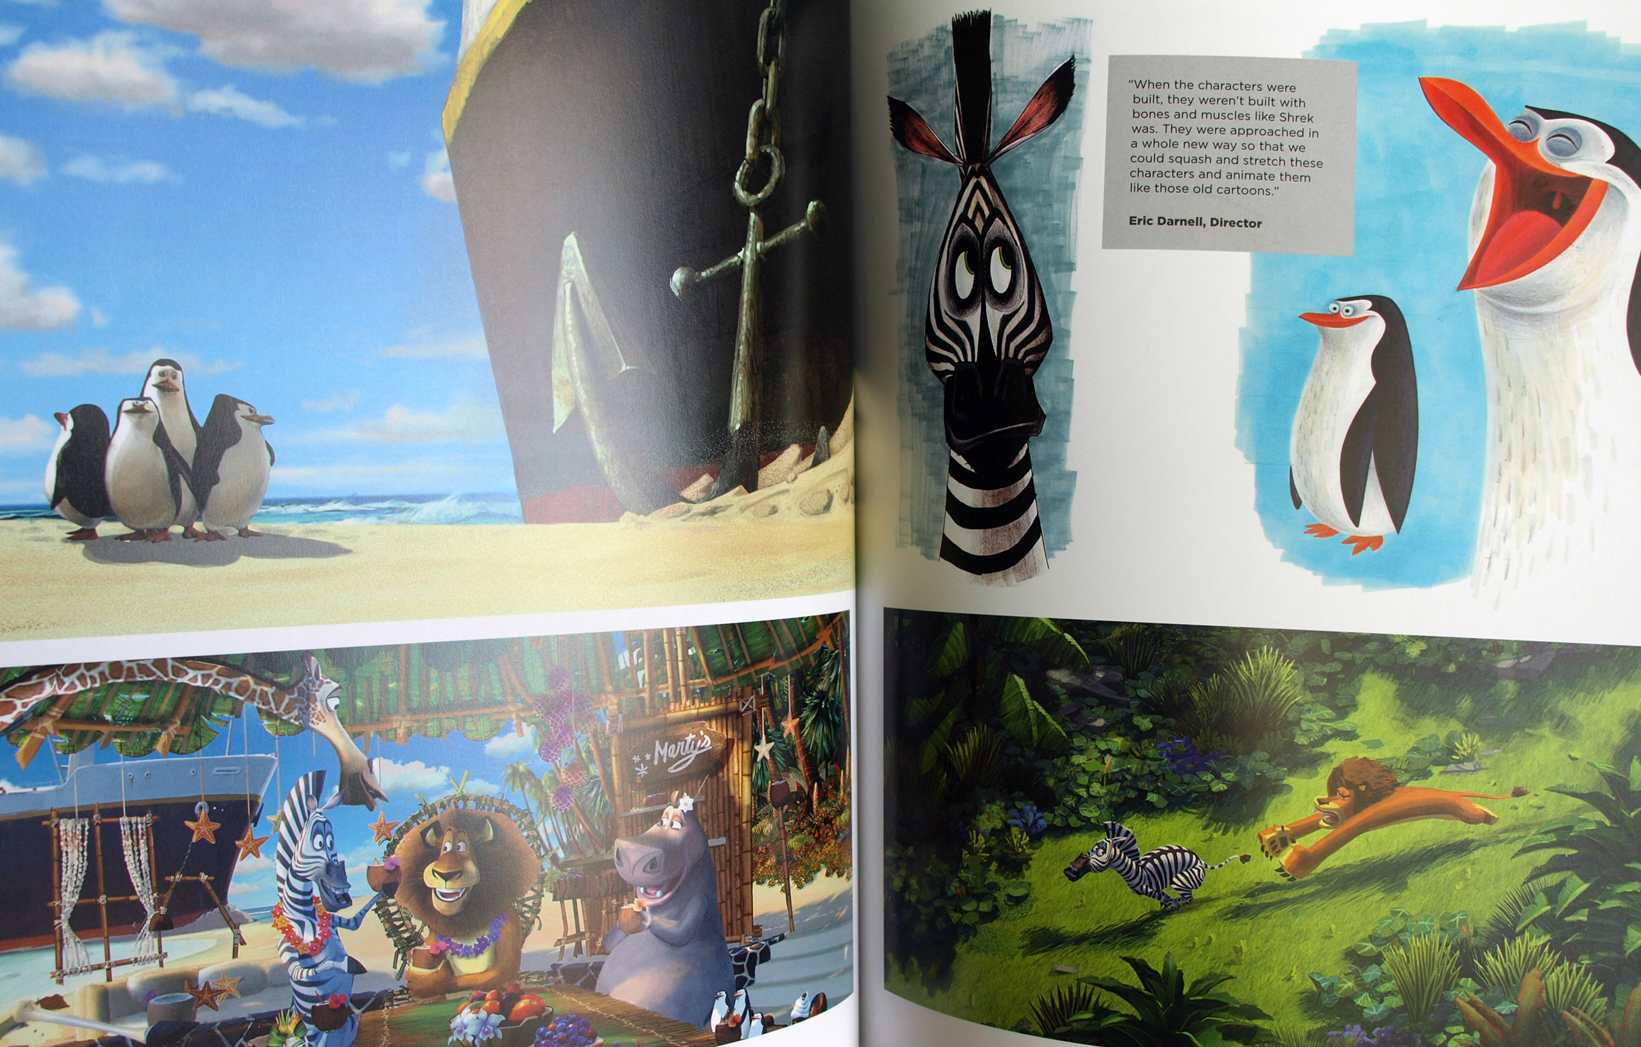 ART BOOK REVIEW] The Art of DreamWorks Animation - Rotoscopers